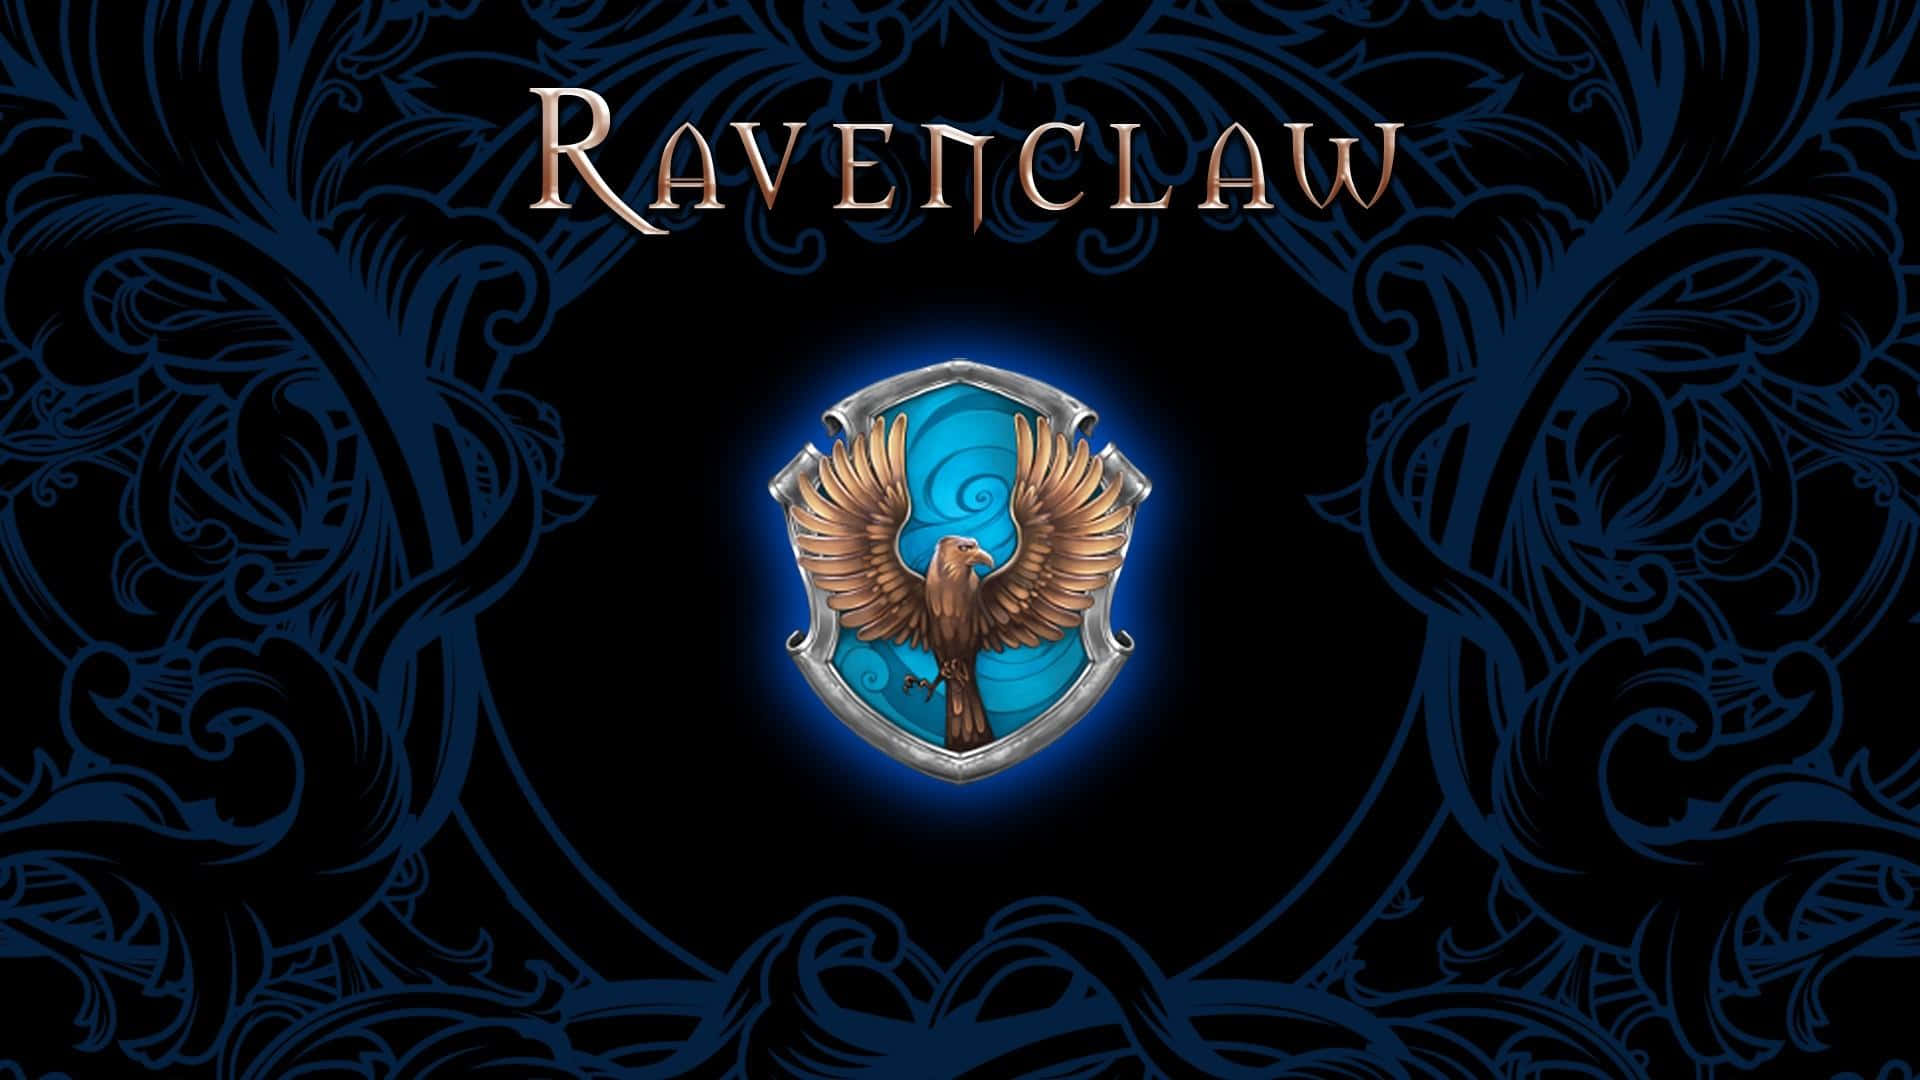 “I Solemnly Swear I'm Up To No Good - A Harry Potter Ravenclaw” Wallpaper